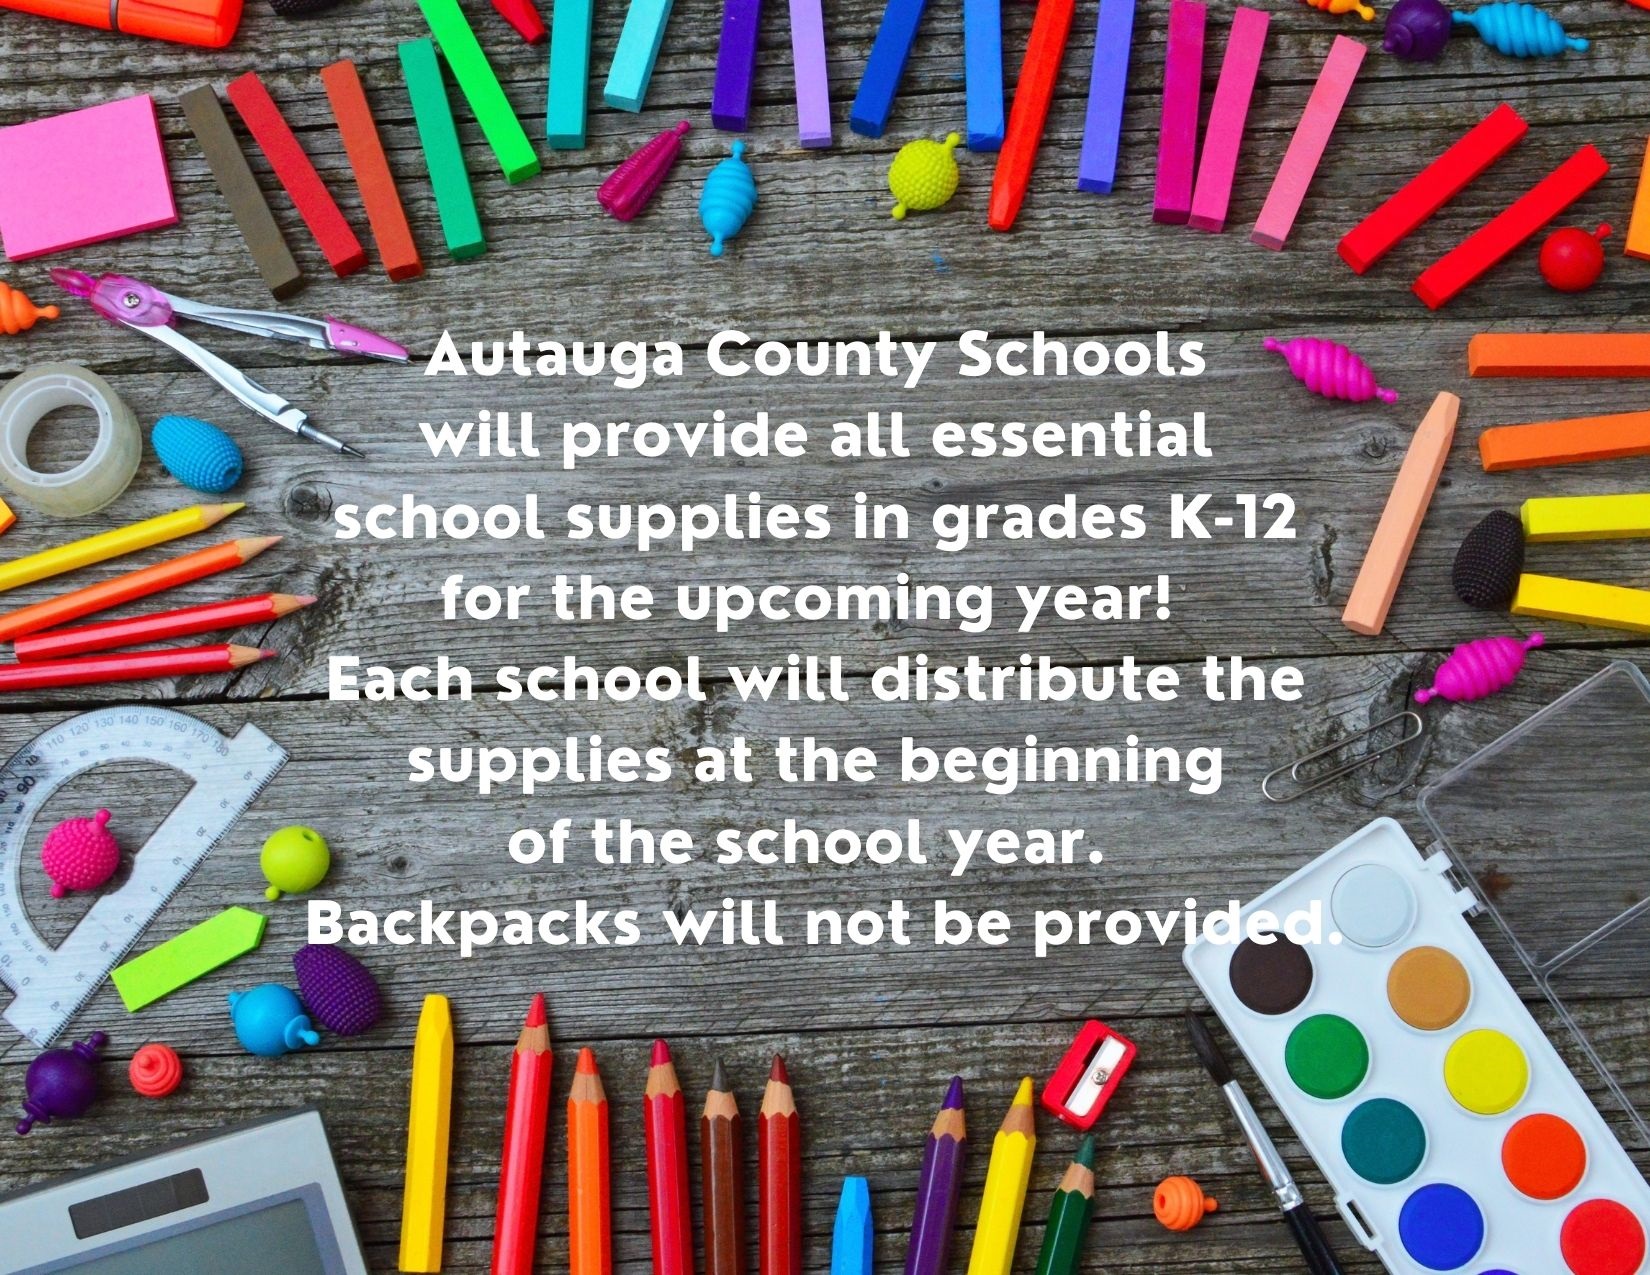 School supplies provided for the 2022-2023 school year